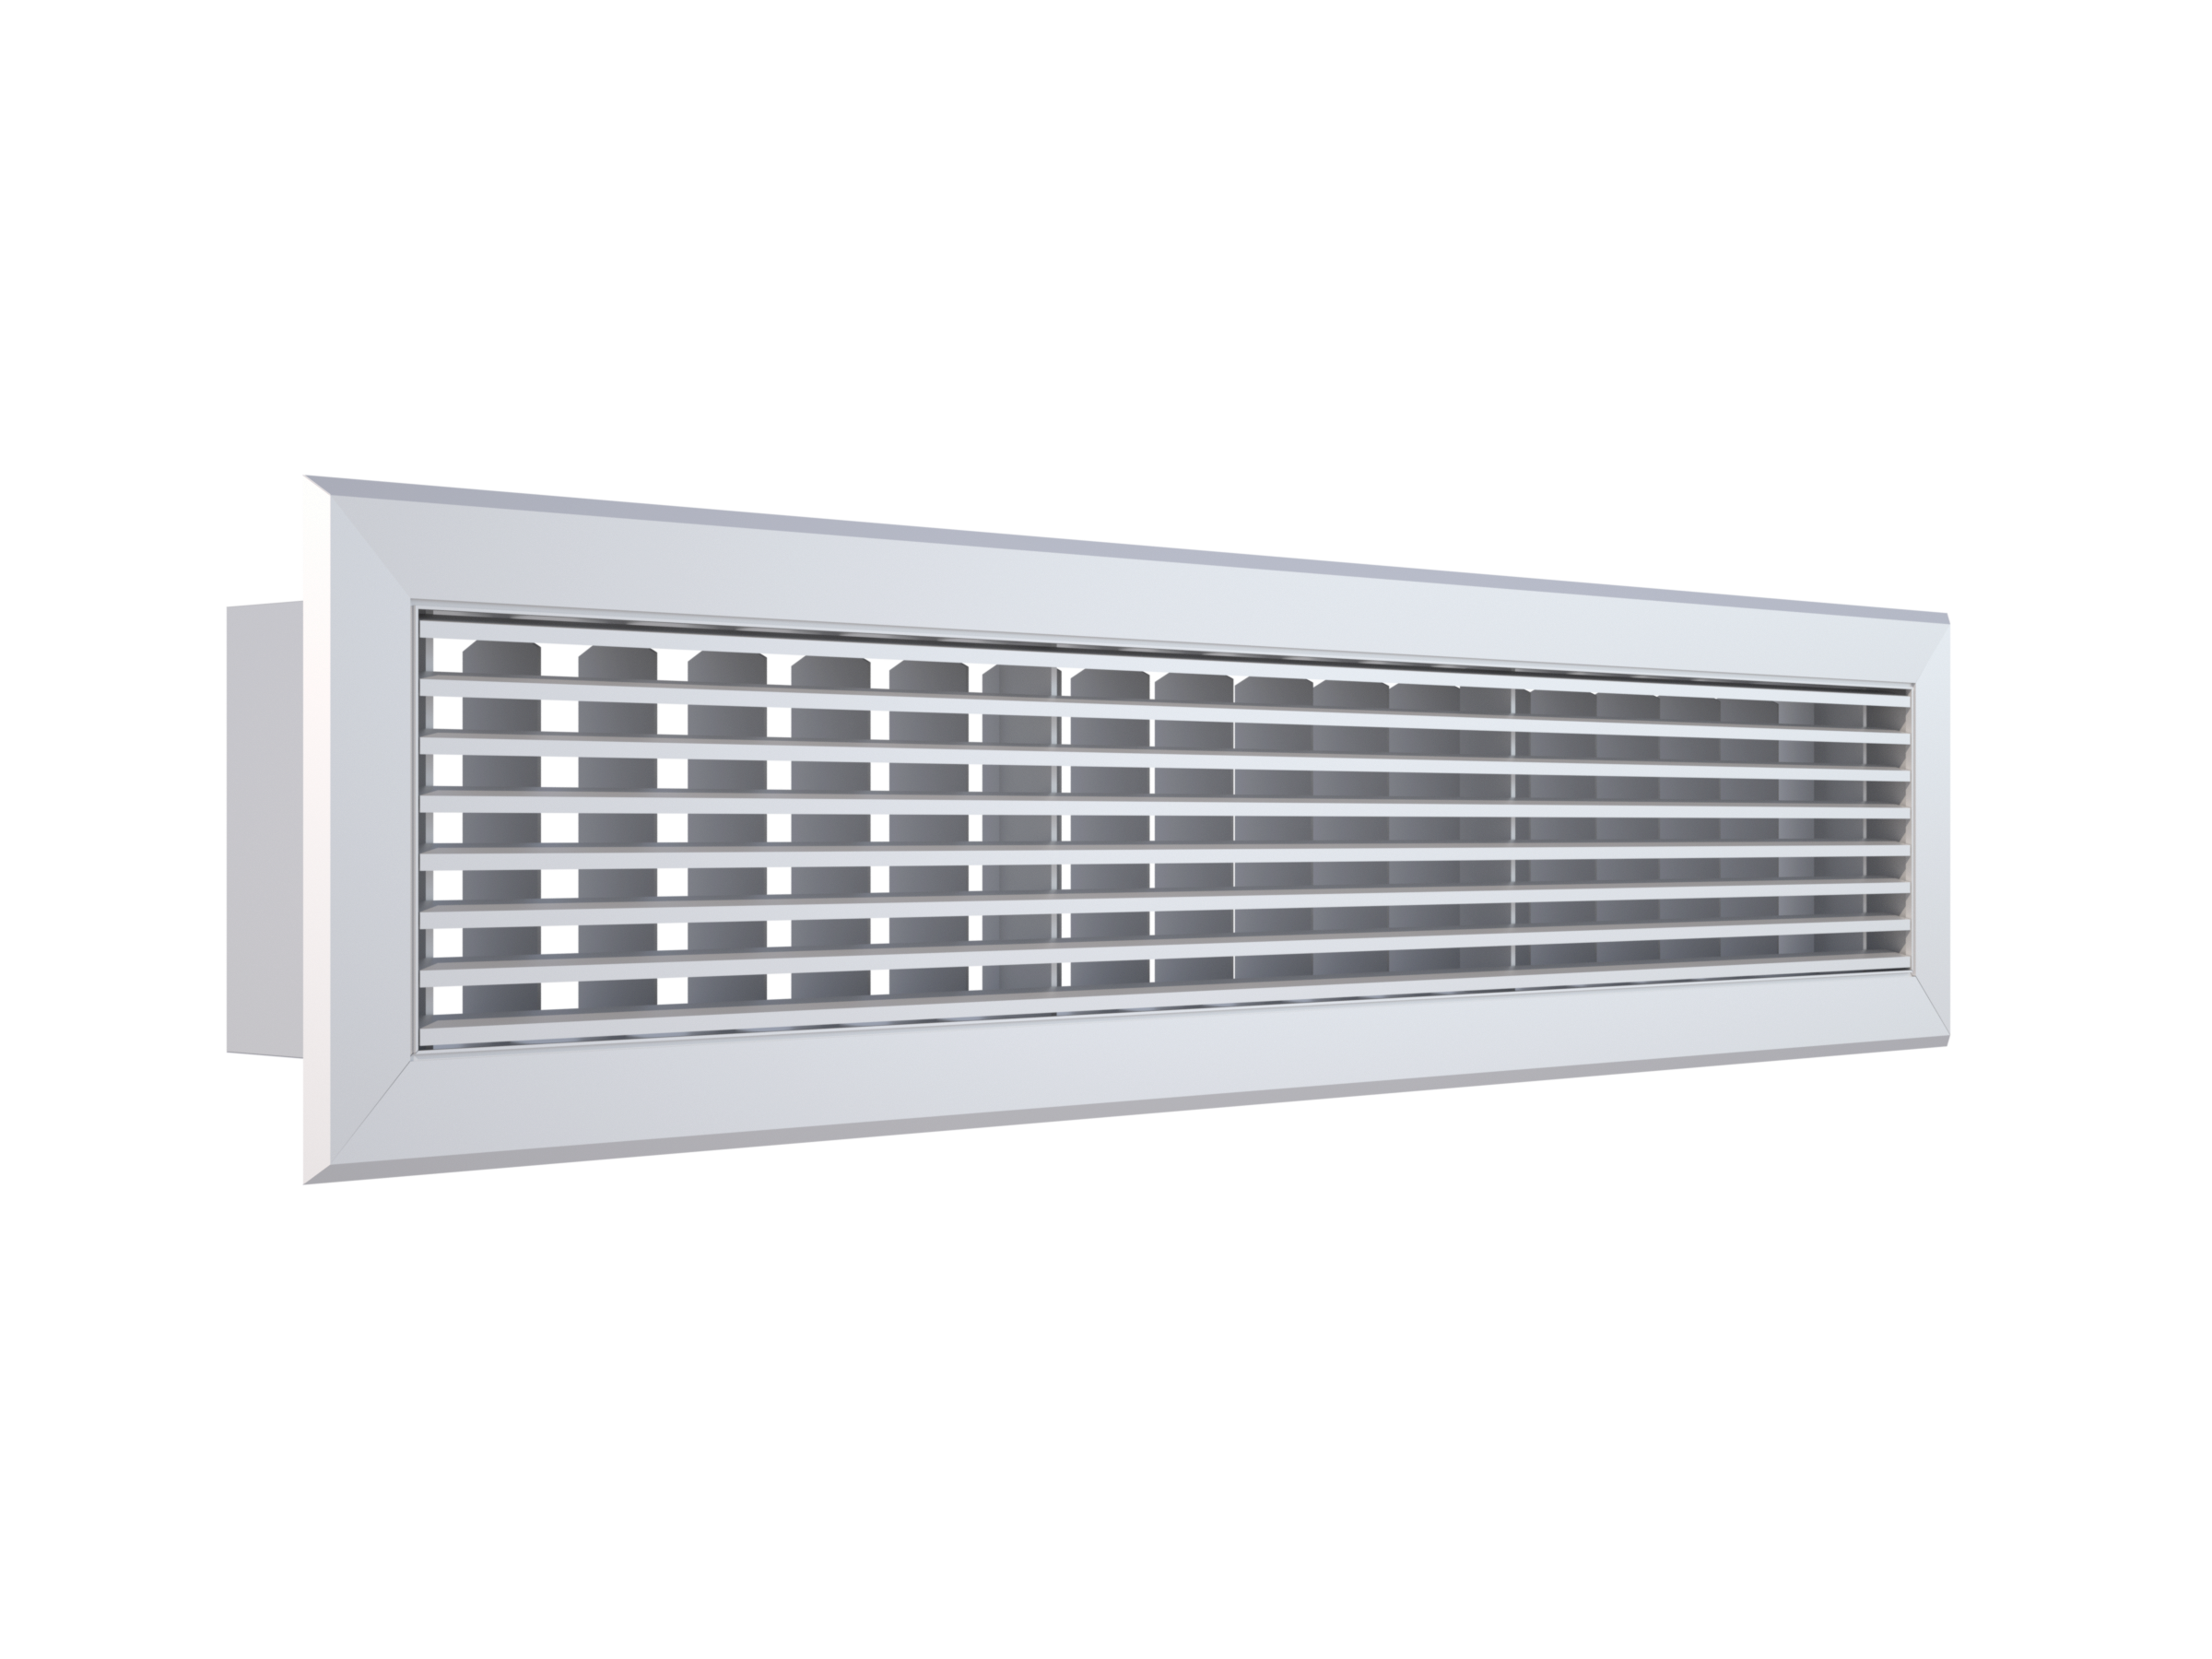 Holyoake LDH-1215SD Linear Bar Grille with 15-degree air discharge and 12mm blade spacing with rear adjustable blades